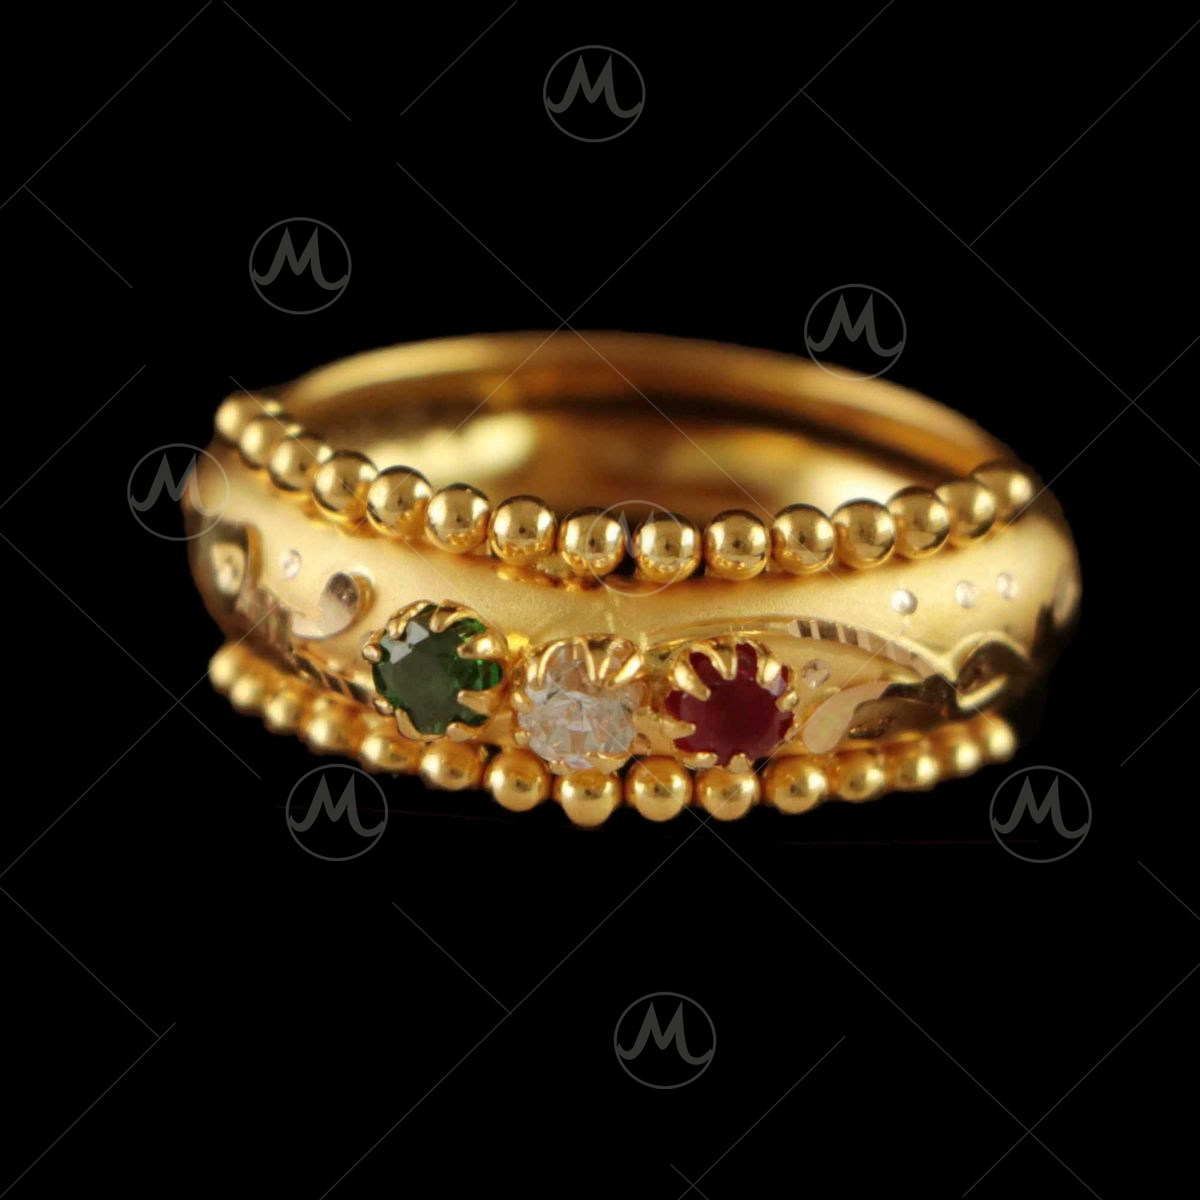 Healing gemstone for Mangal dosh @  https://shop.coral.org.in/coral-gemstone-exporters-moonga-online/best… |  Gold ring designs, Gold rings fashion, Coral jewelry set